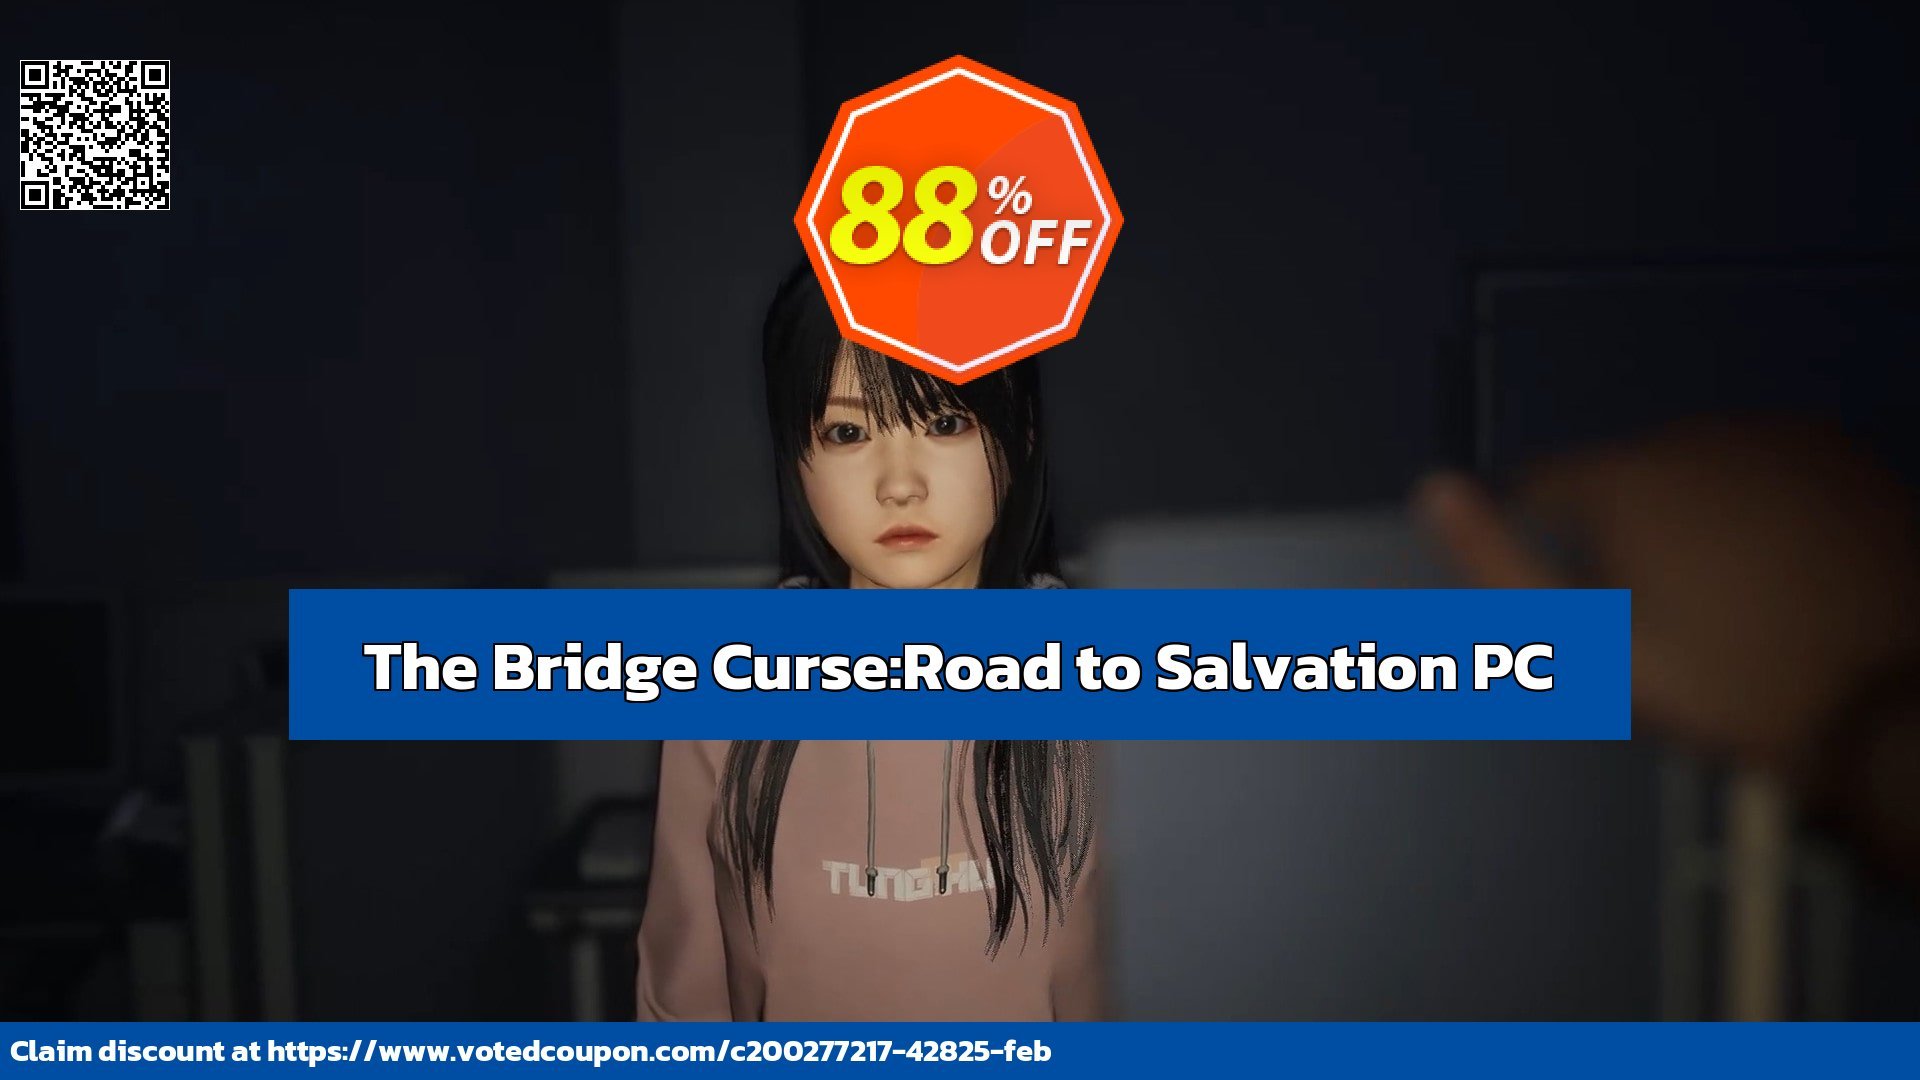 The Bridge Curse:Road to Salvation PC Coupon Code May 2024, 88% OFF - VotedCoupon